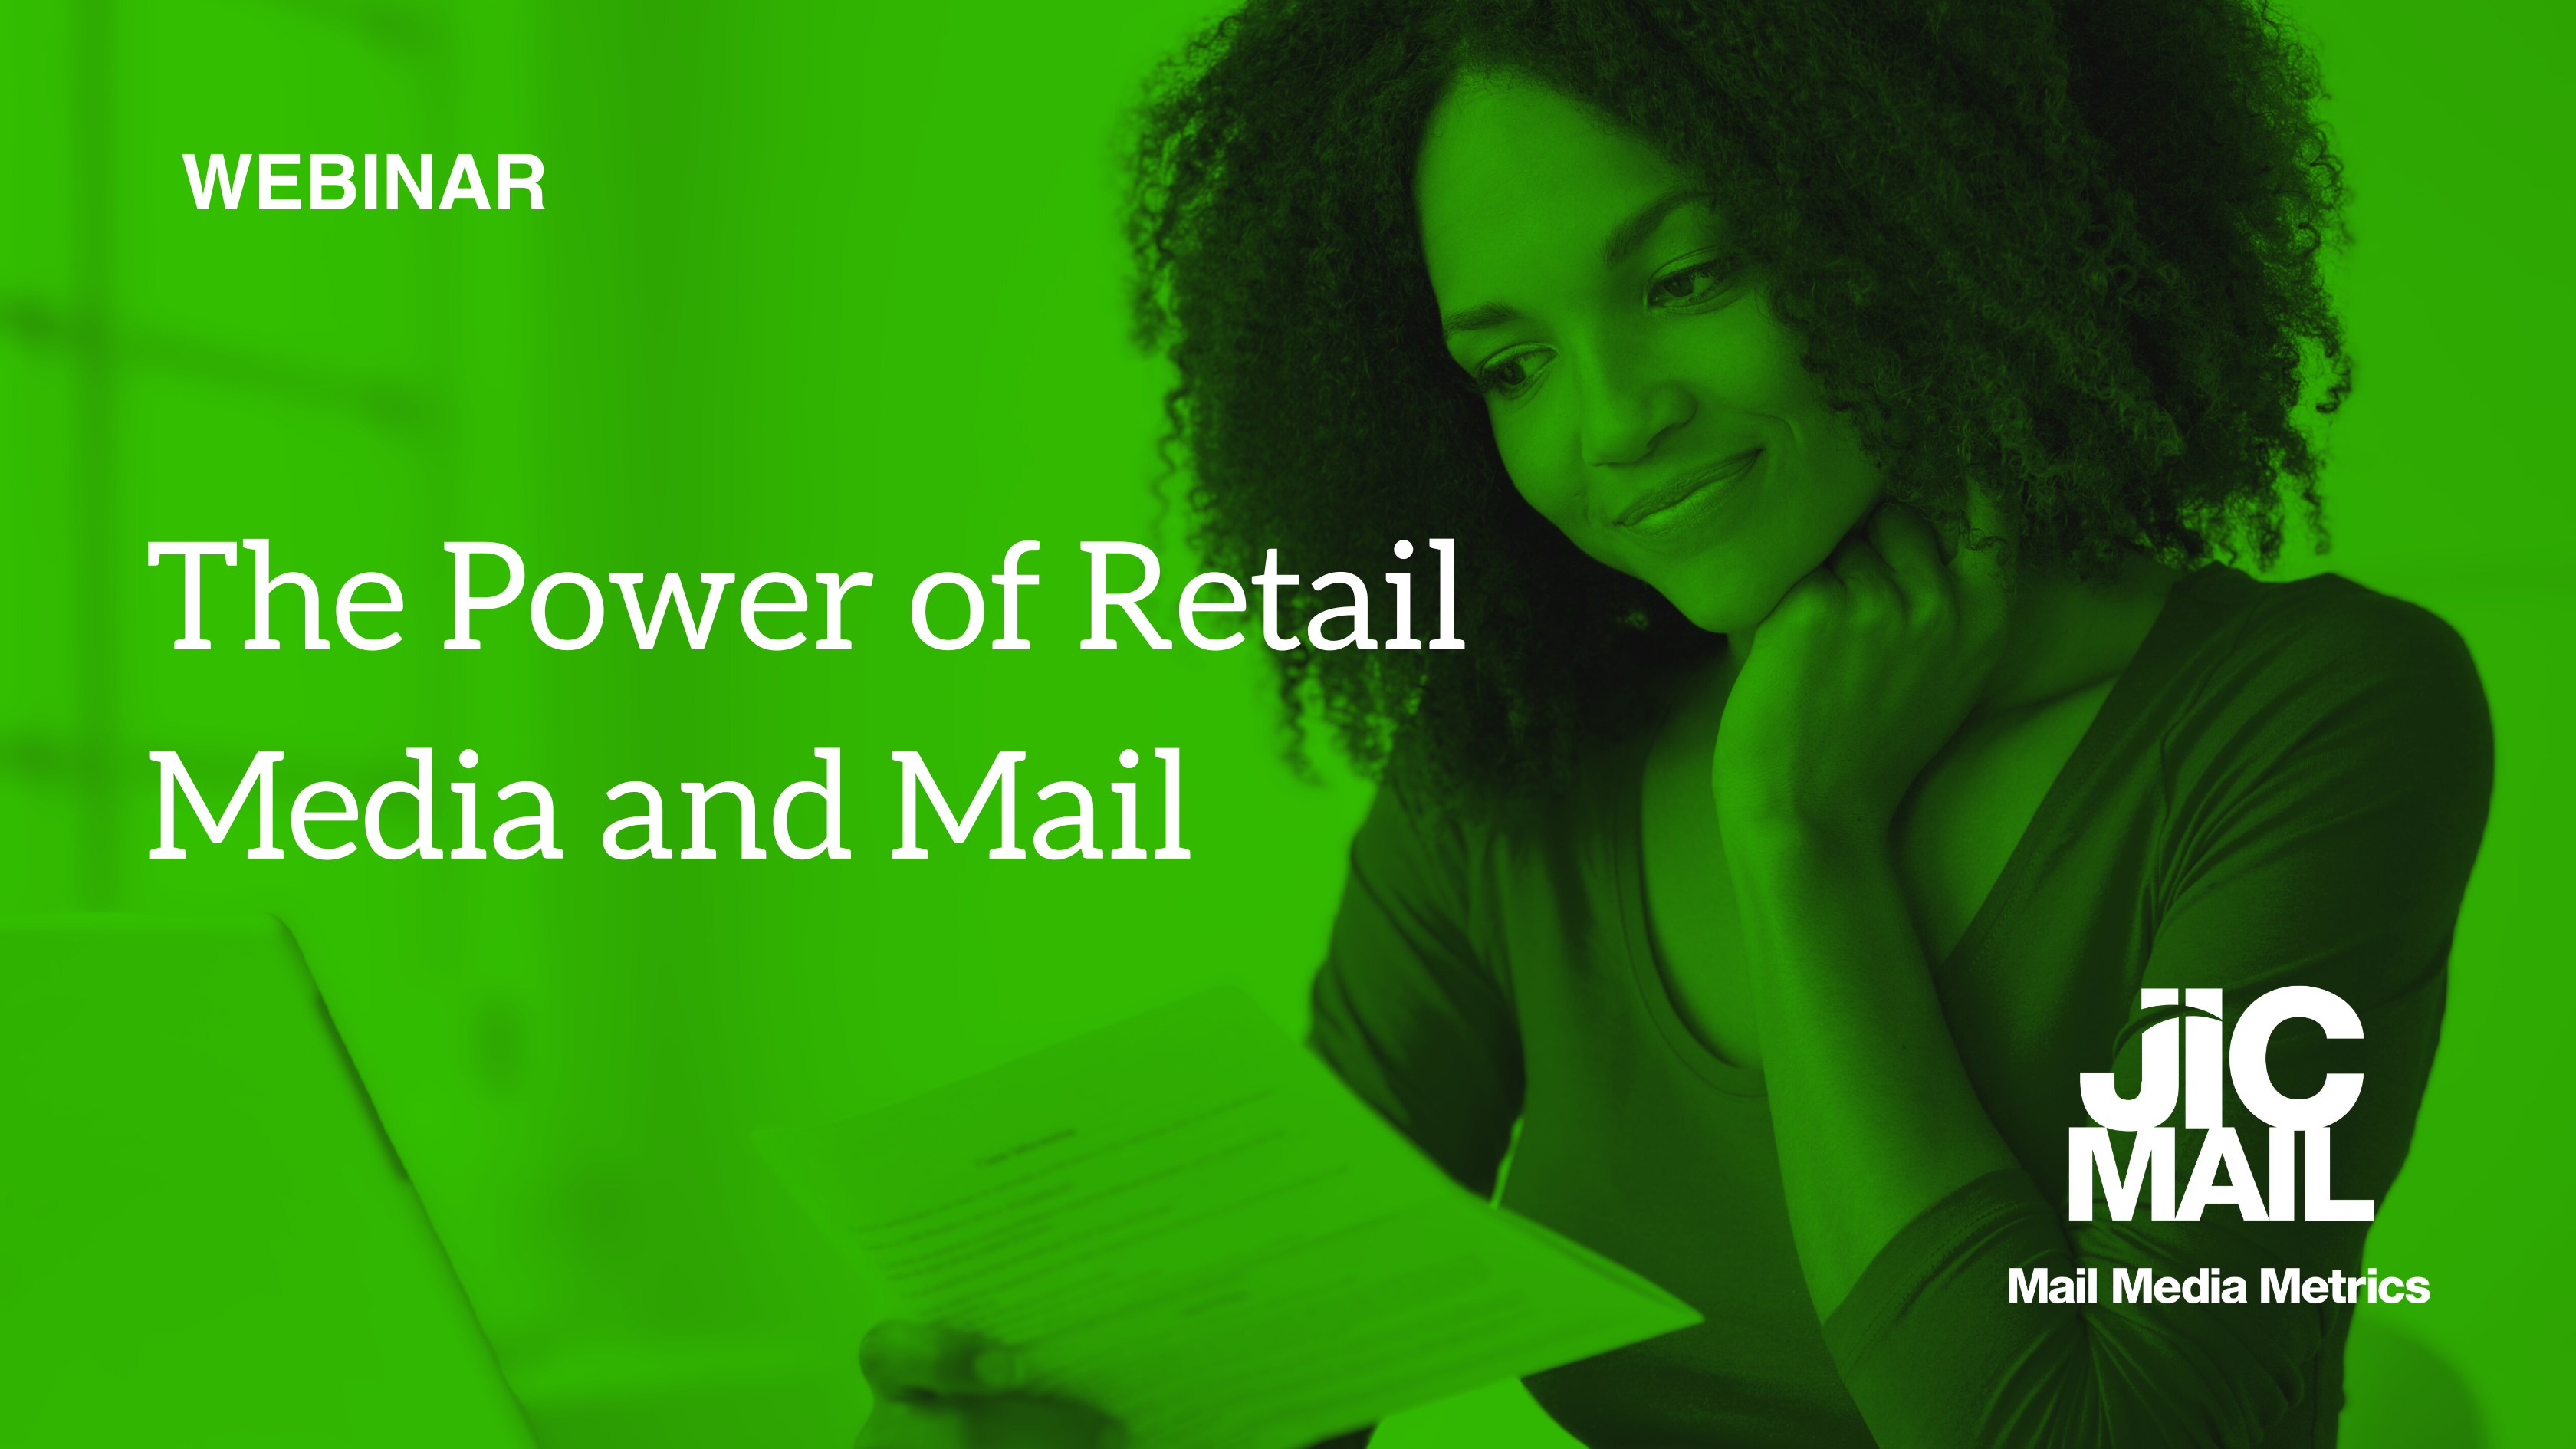 JICMAIL Webinar: The Power of Retail Media and Mail